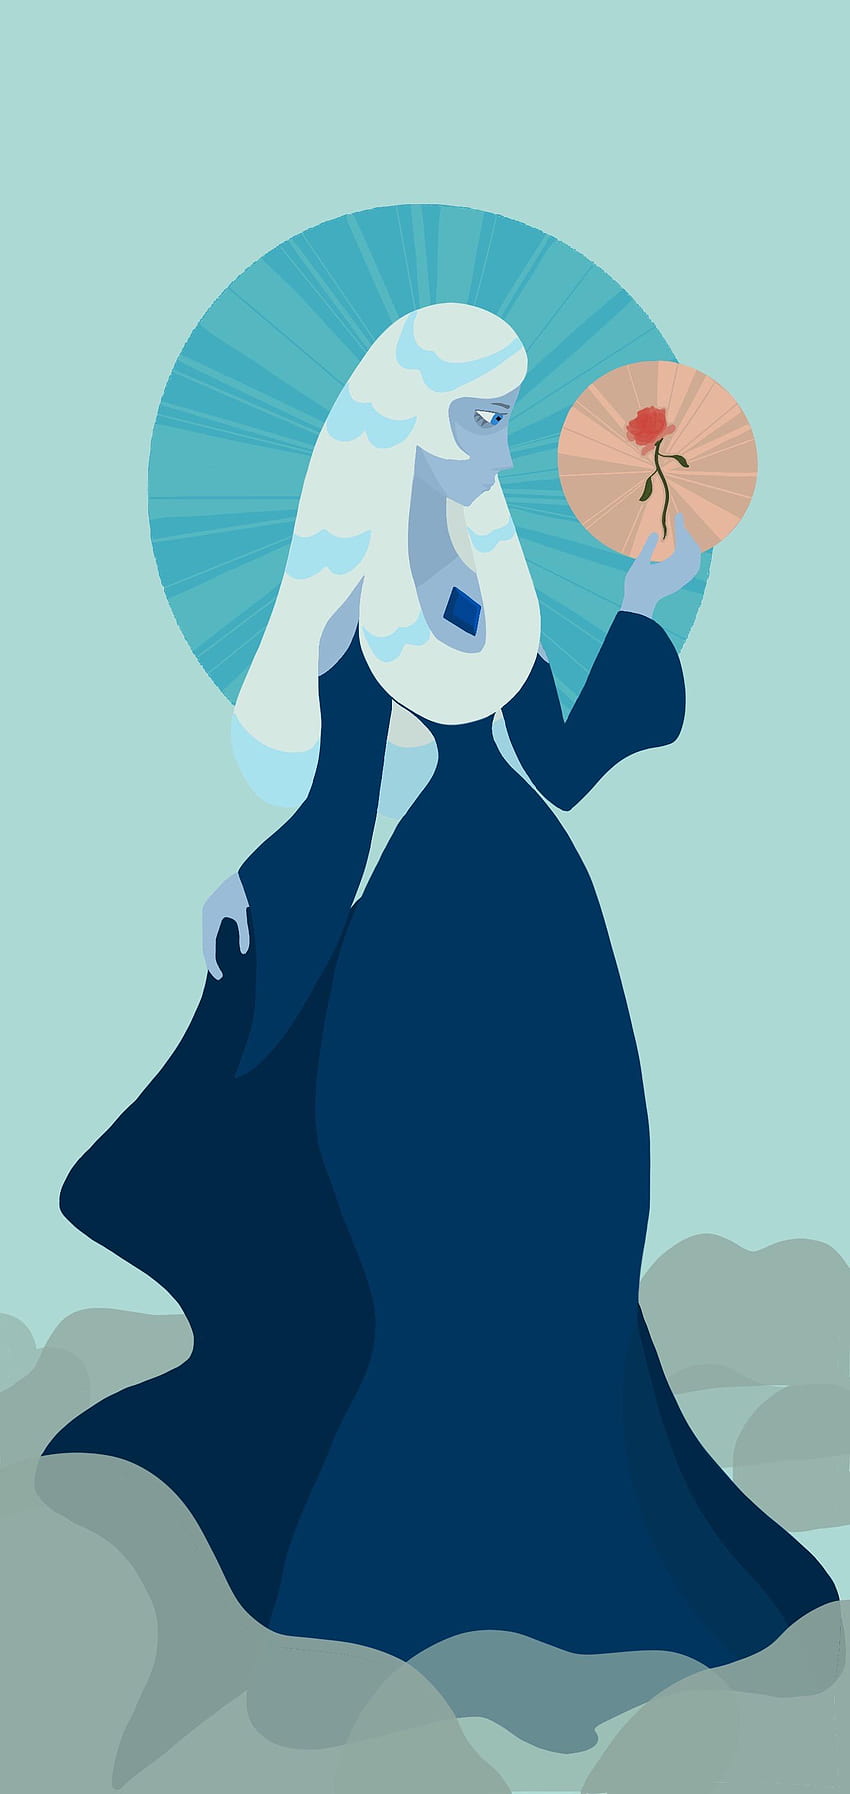 Simplistic Blue Diamond I Made With Procreate. Not Sure If Done Completely, Please Give Critics And Tips! : R Stevenuniverse, Diamond Steven Universe HD phone wallpaper